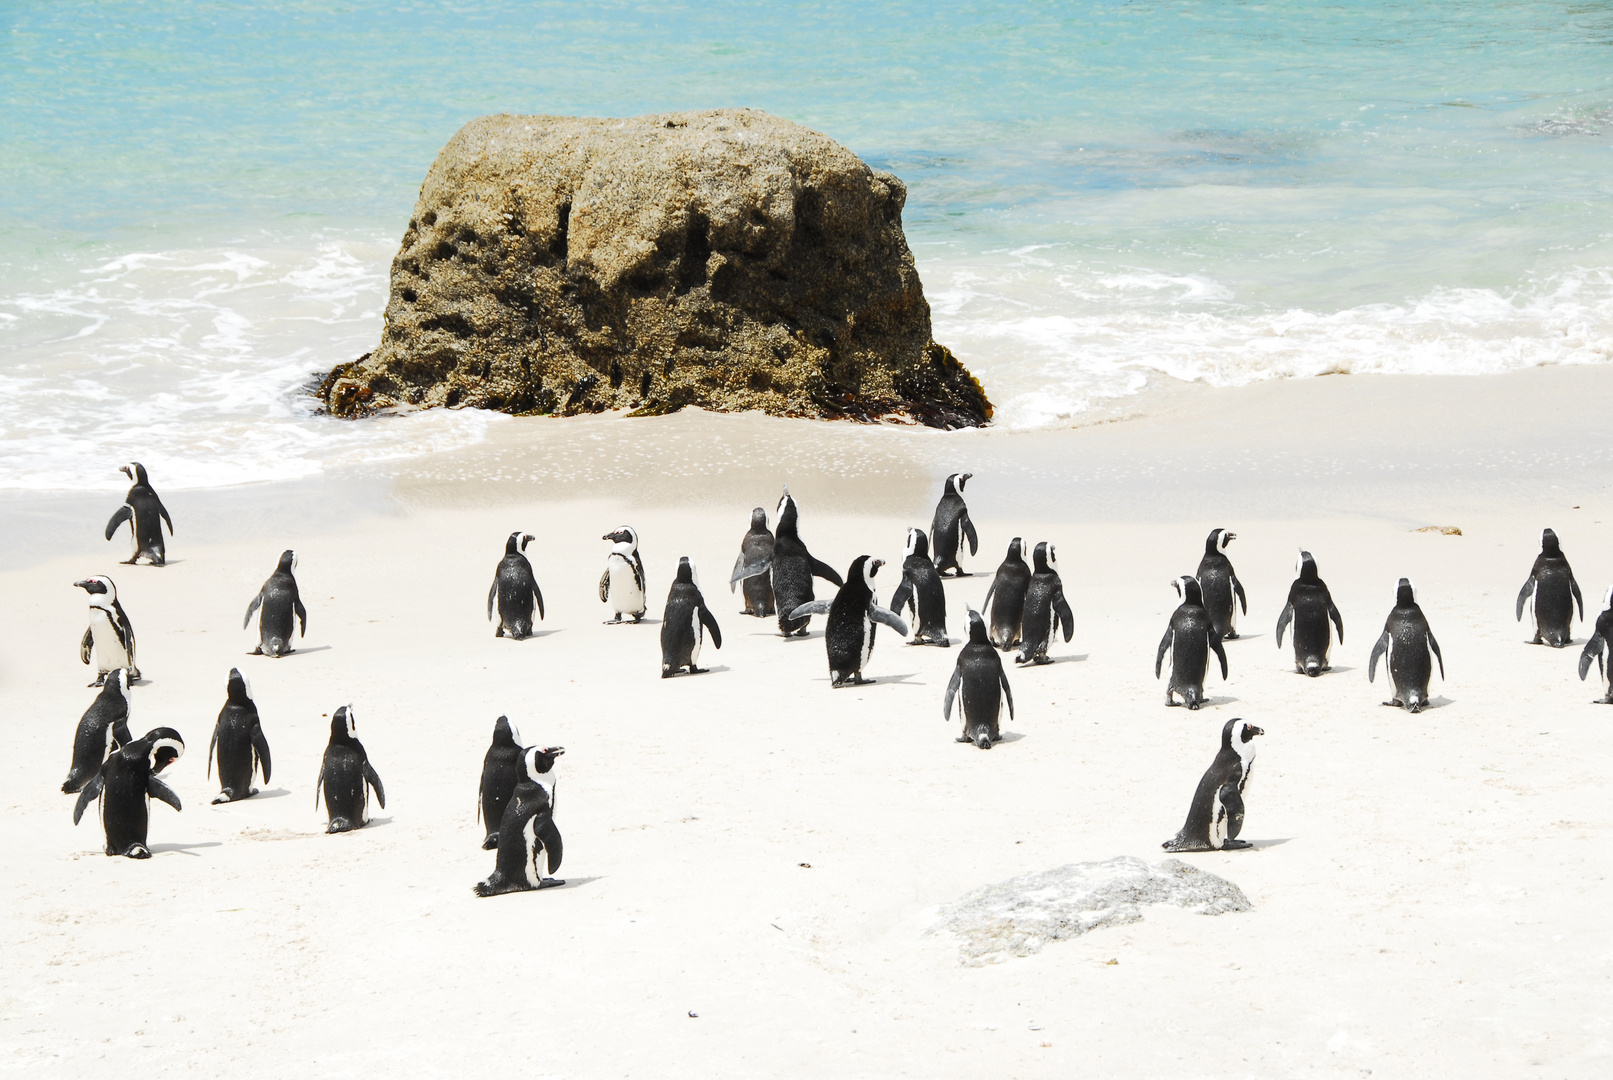 Penguins at the Cape